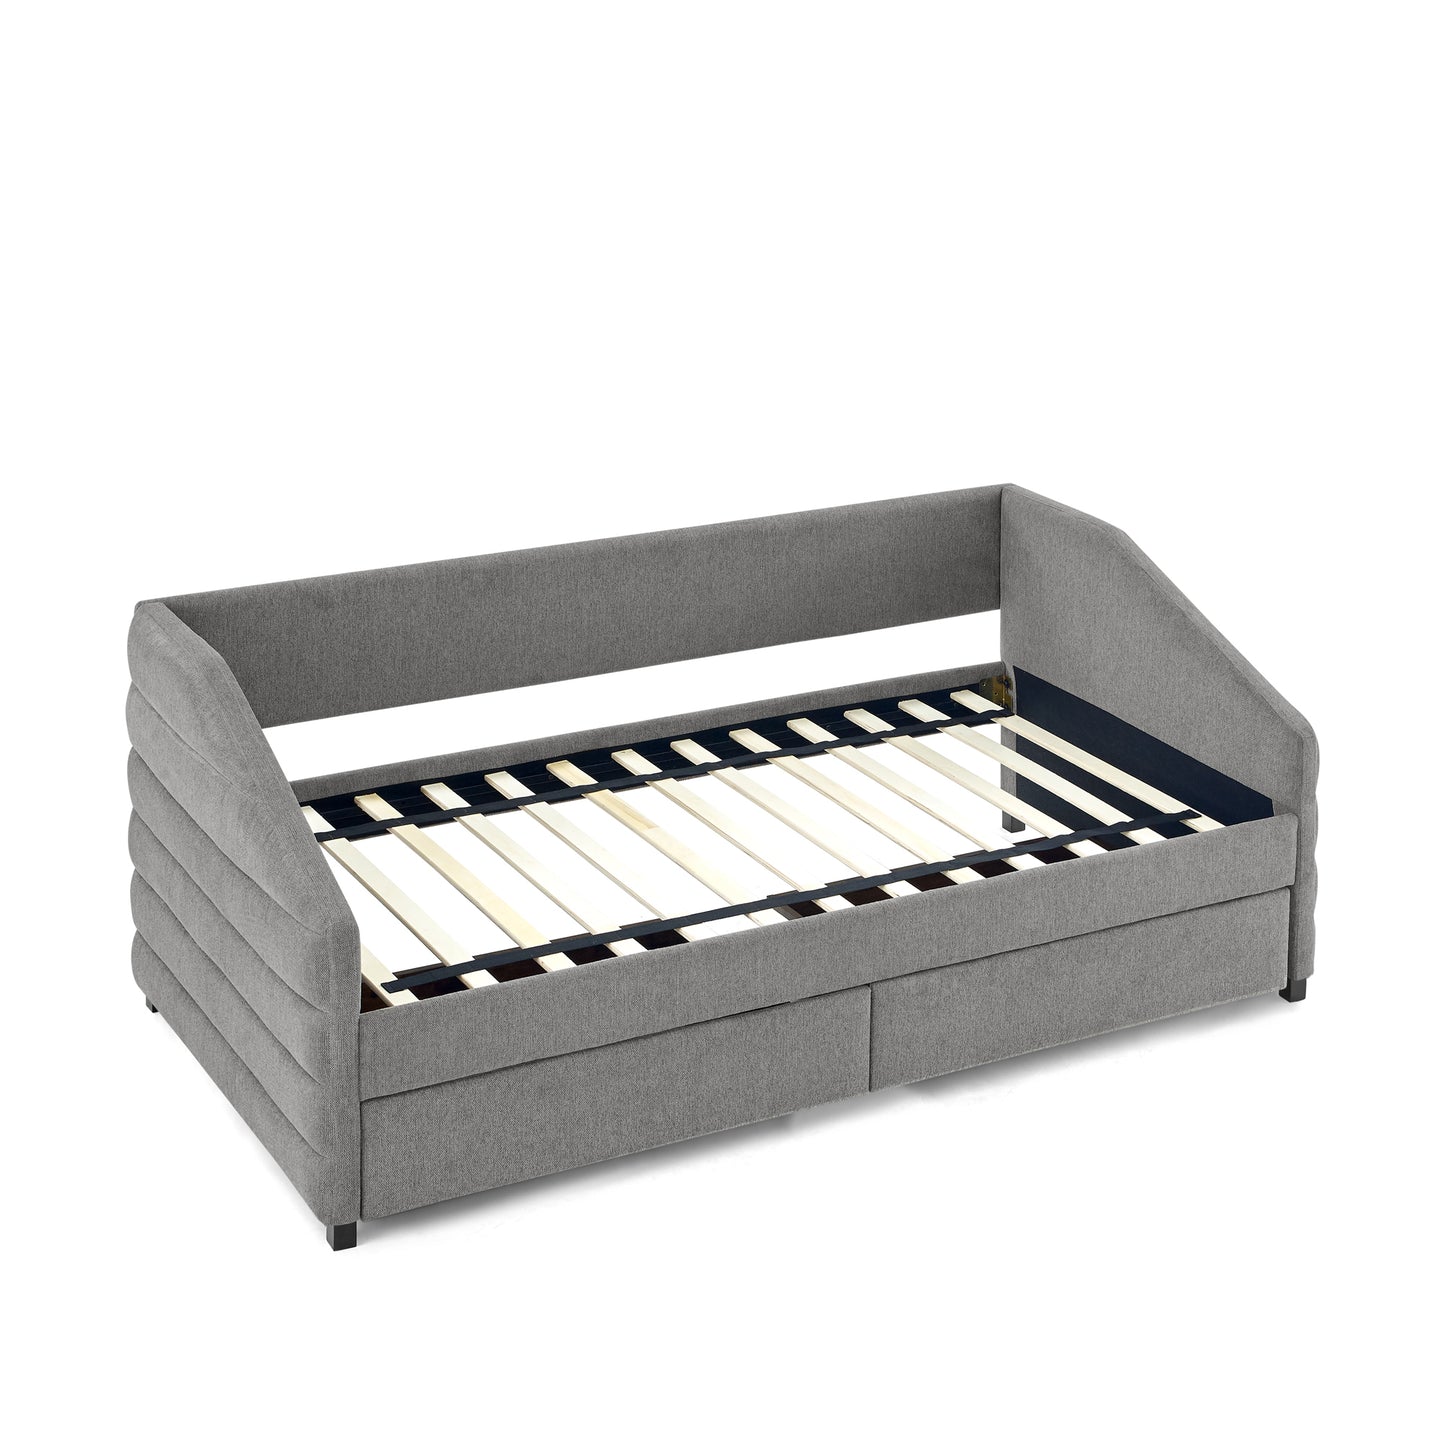 Lined Dark Gray Daybed with Drawers (twin)